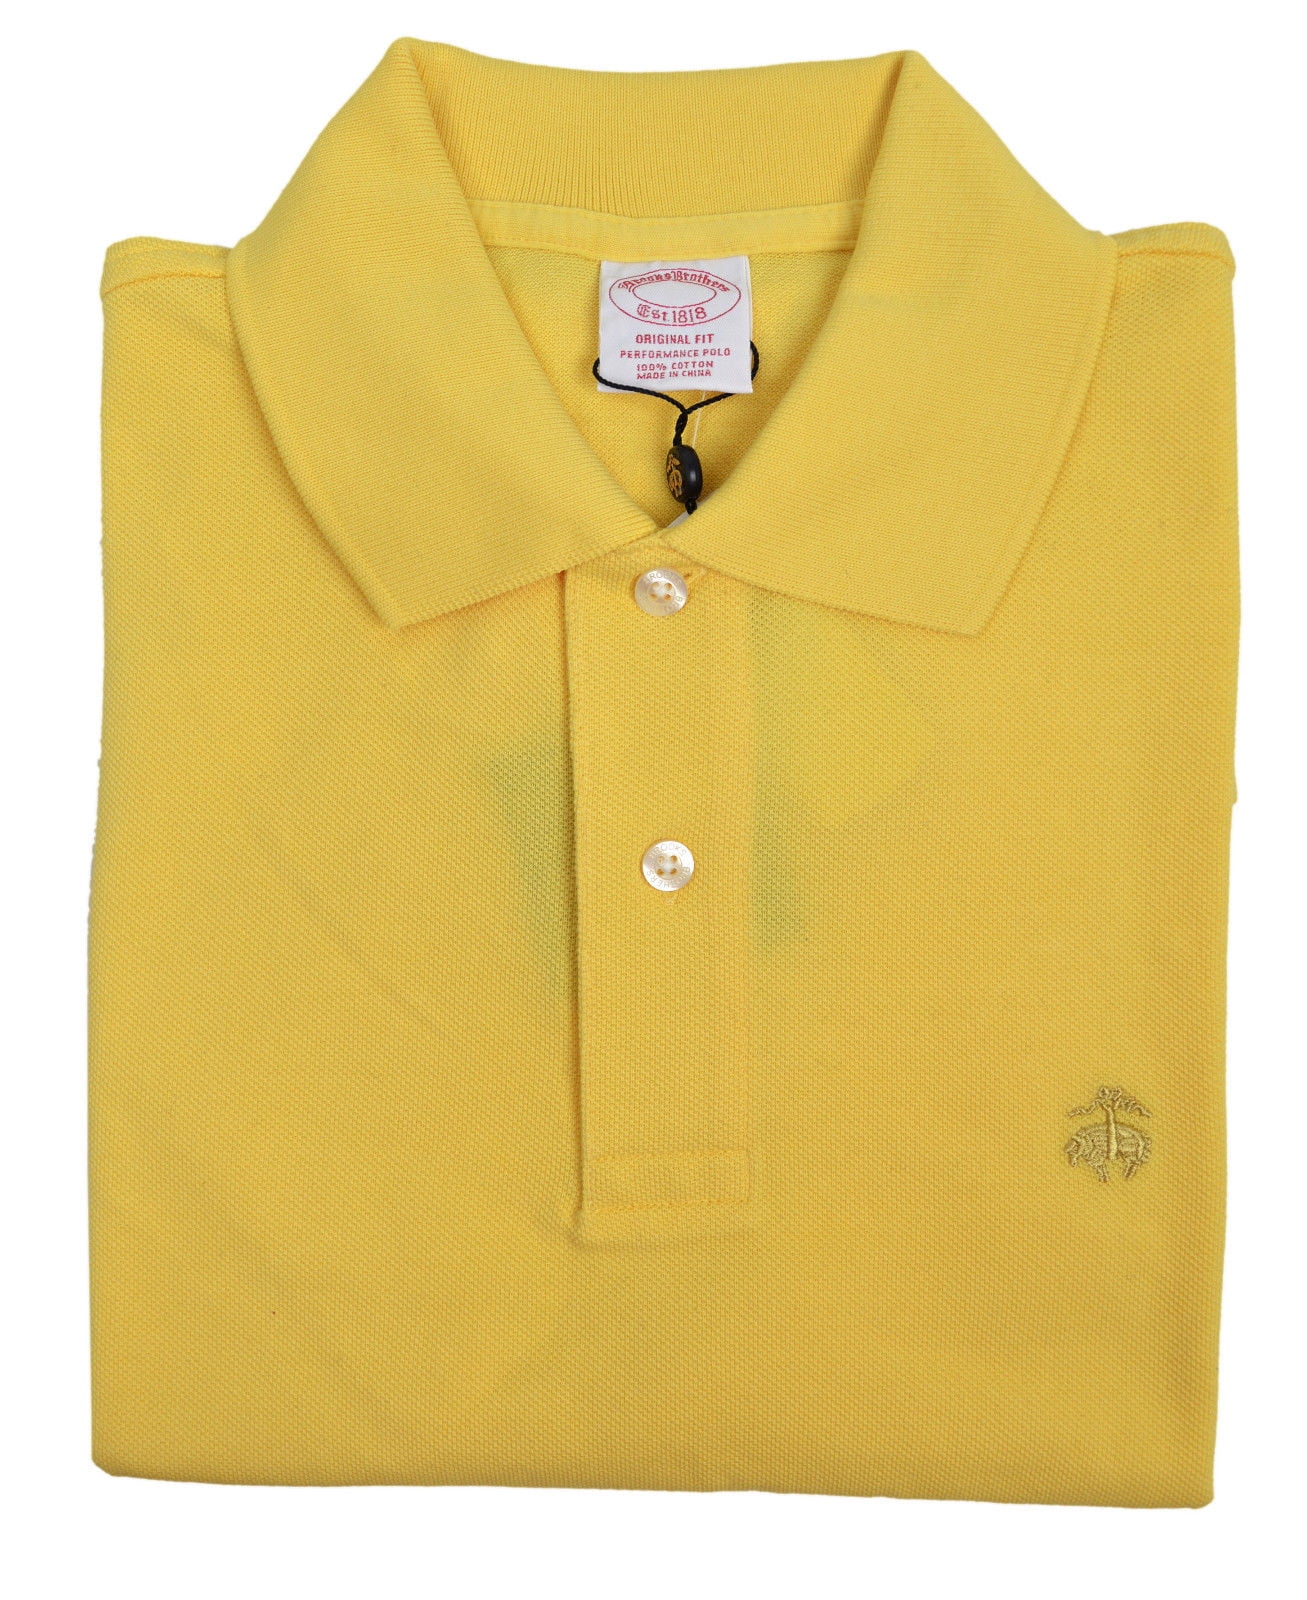 New Brooks Brothers Mens Pale Yellow Performance Polo Shirt Sz Small S ...